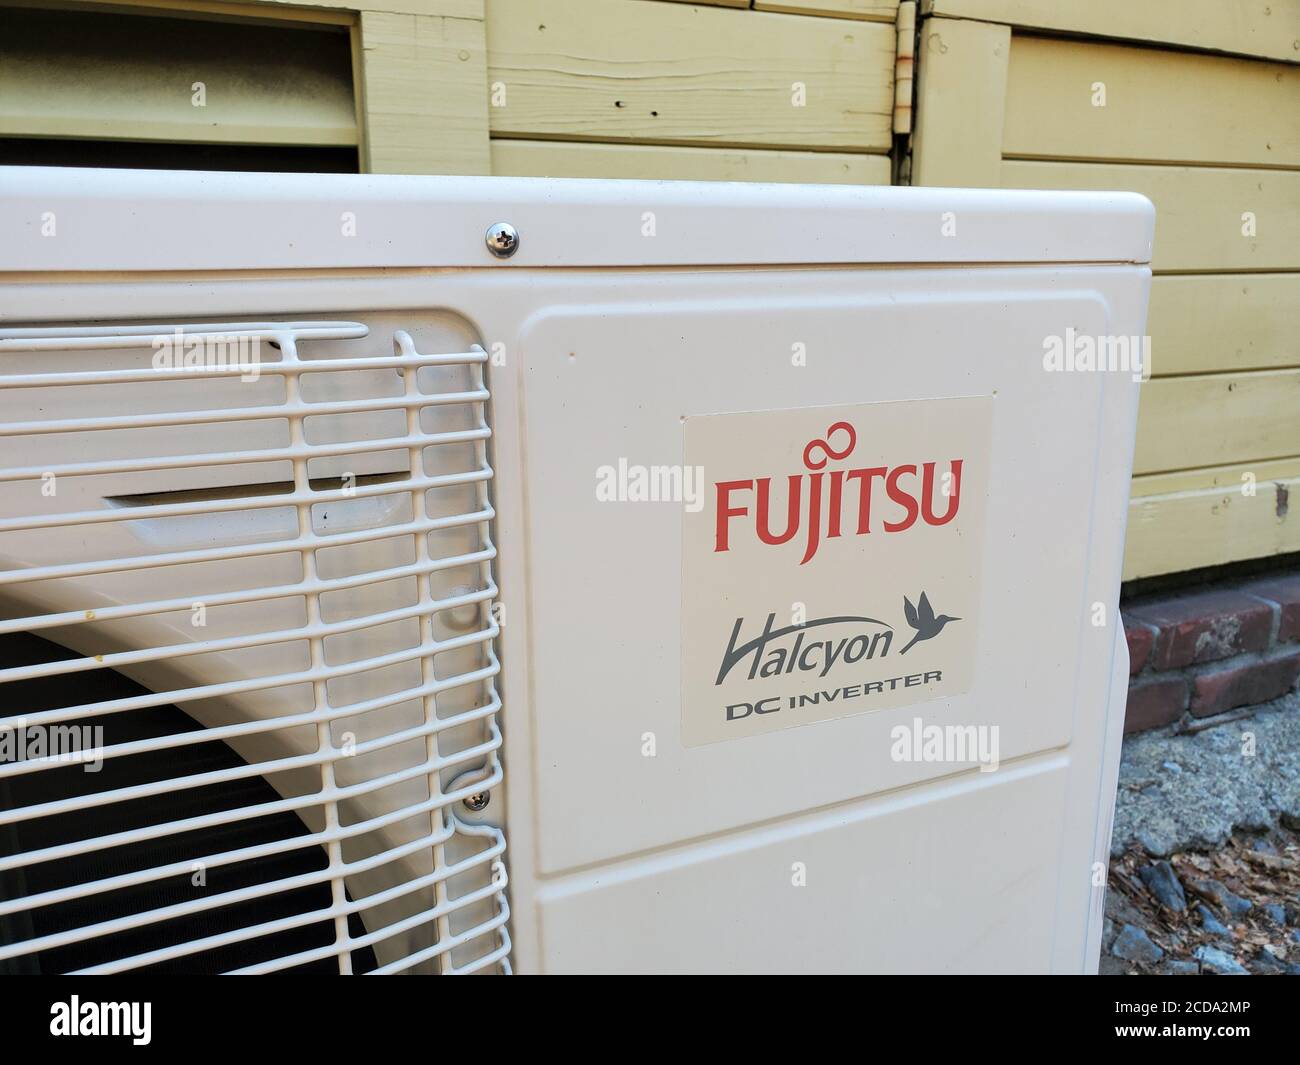 Close-up of logo for Fujitsu and Halycon on HVAC equipment, Danville, California, August 10, 2020. () Stock Photo